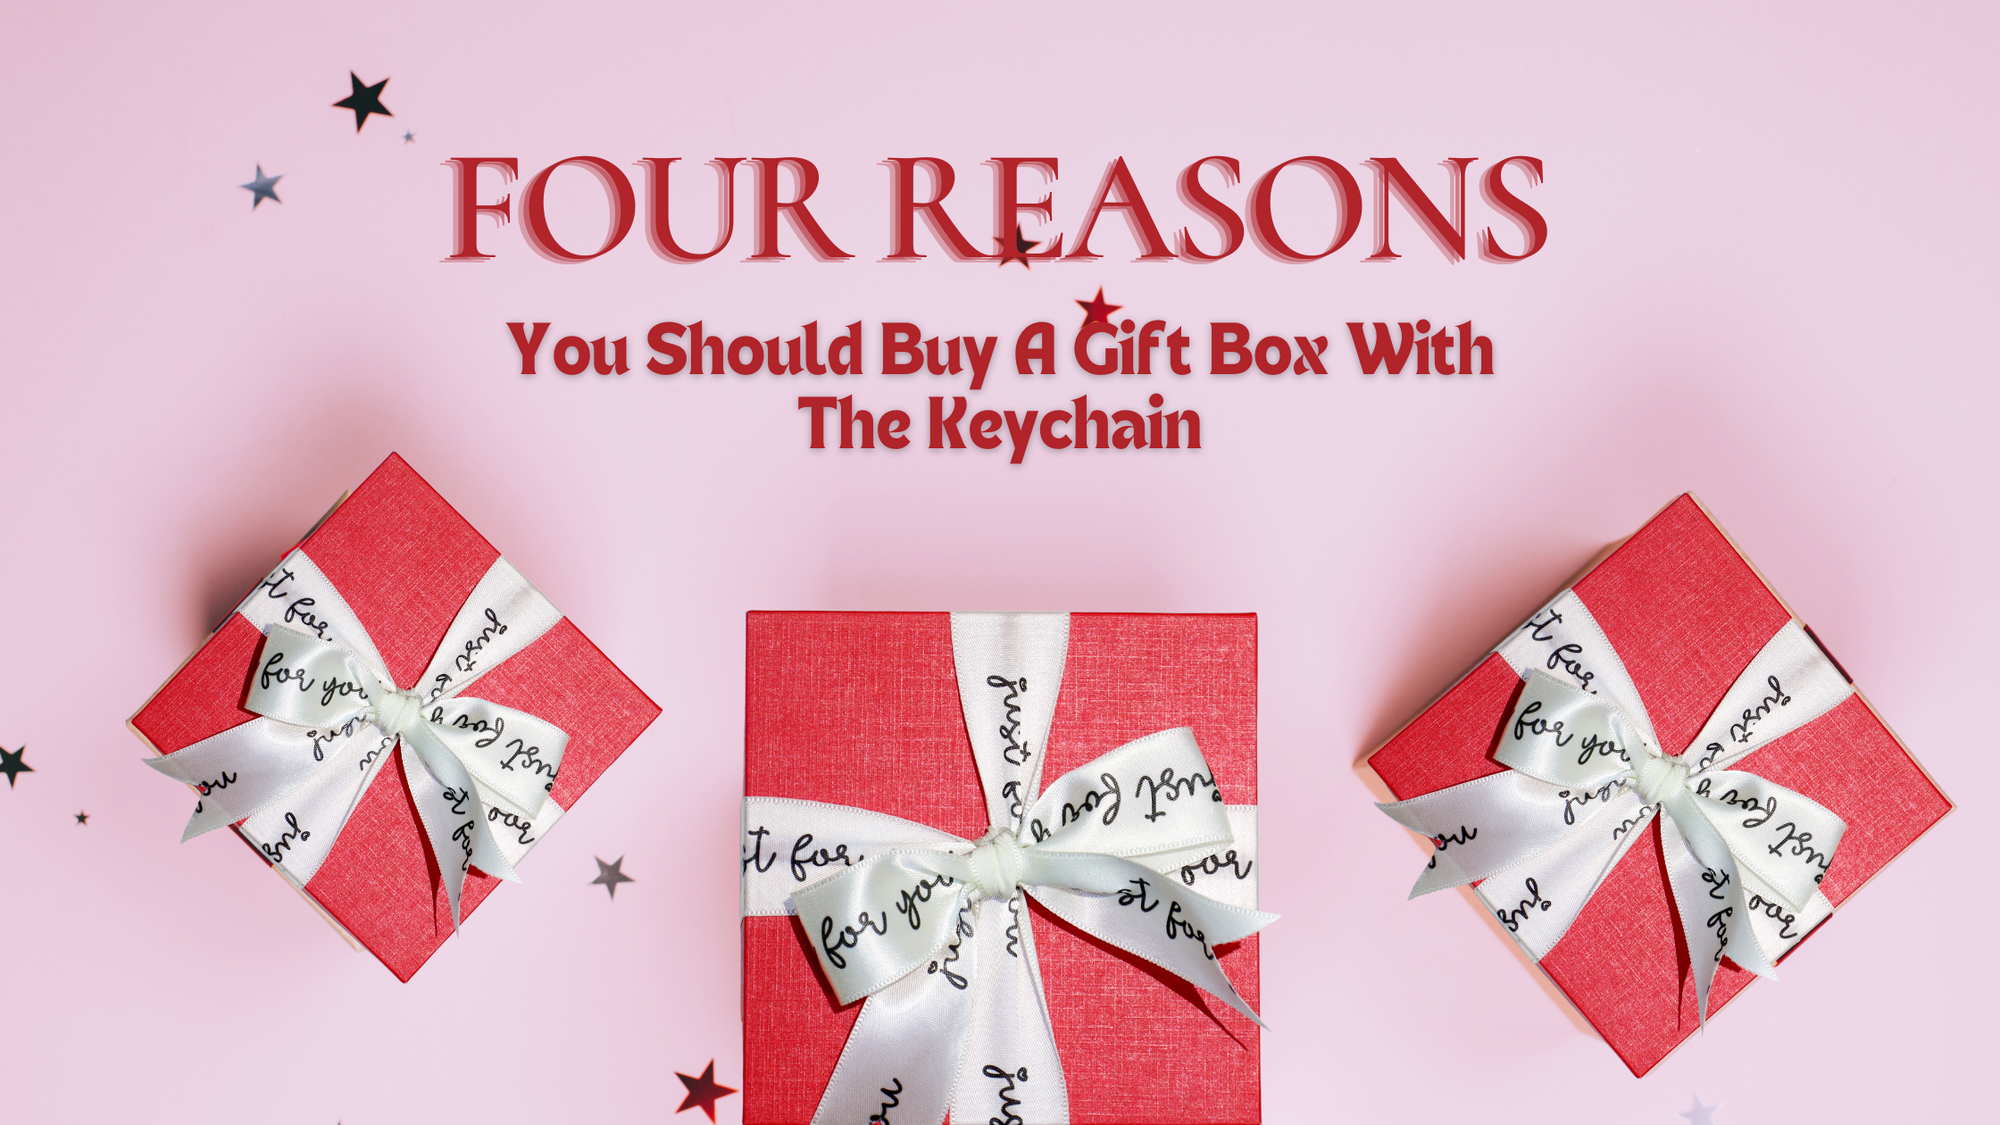 Four Reasons You Should Buy A Gift Box With The Keychain